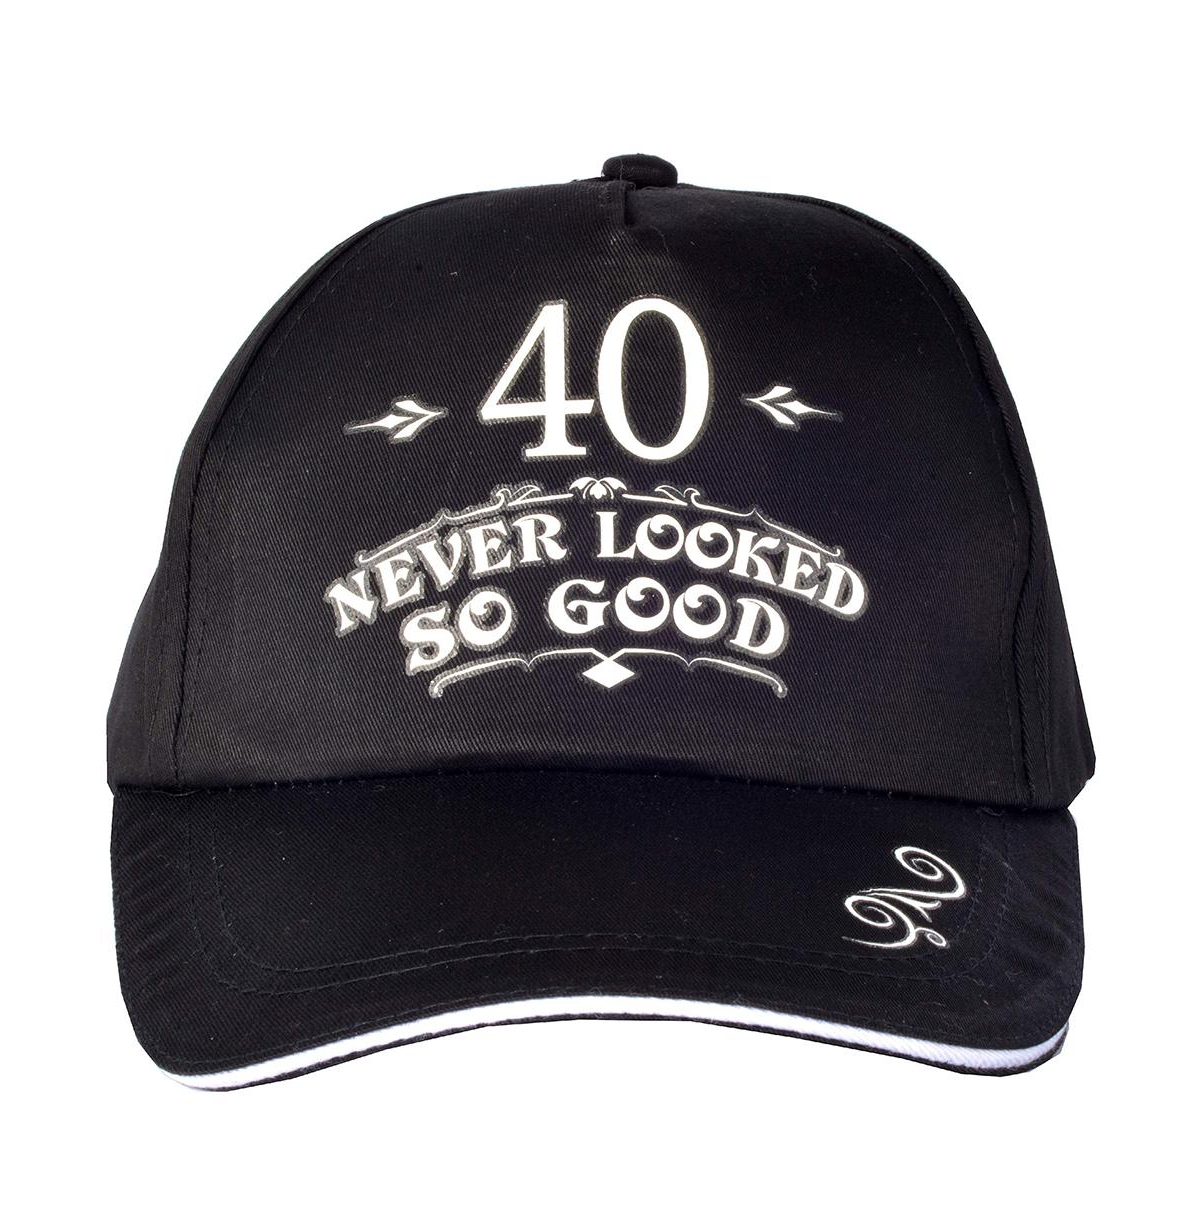 Men's 40th Birthday Gift Set: "40 Never Looked So Good" Baseball Cap and Sash, Perfect for 40th Birthday Party Supplies and Decorations, Stylish Acces